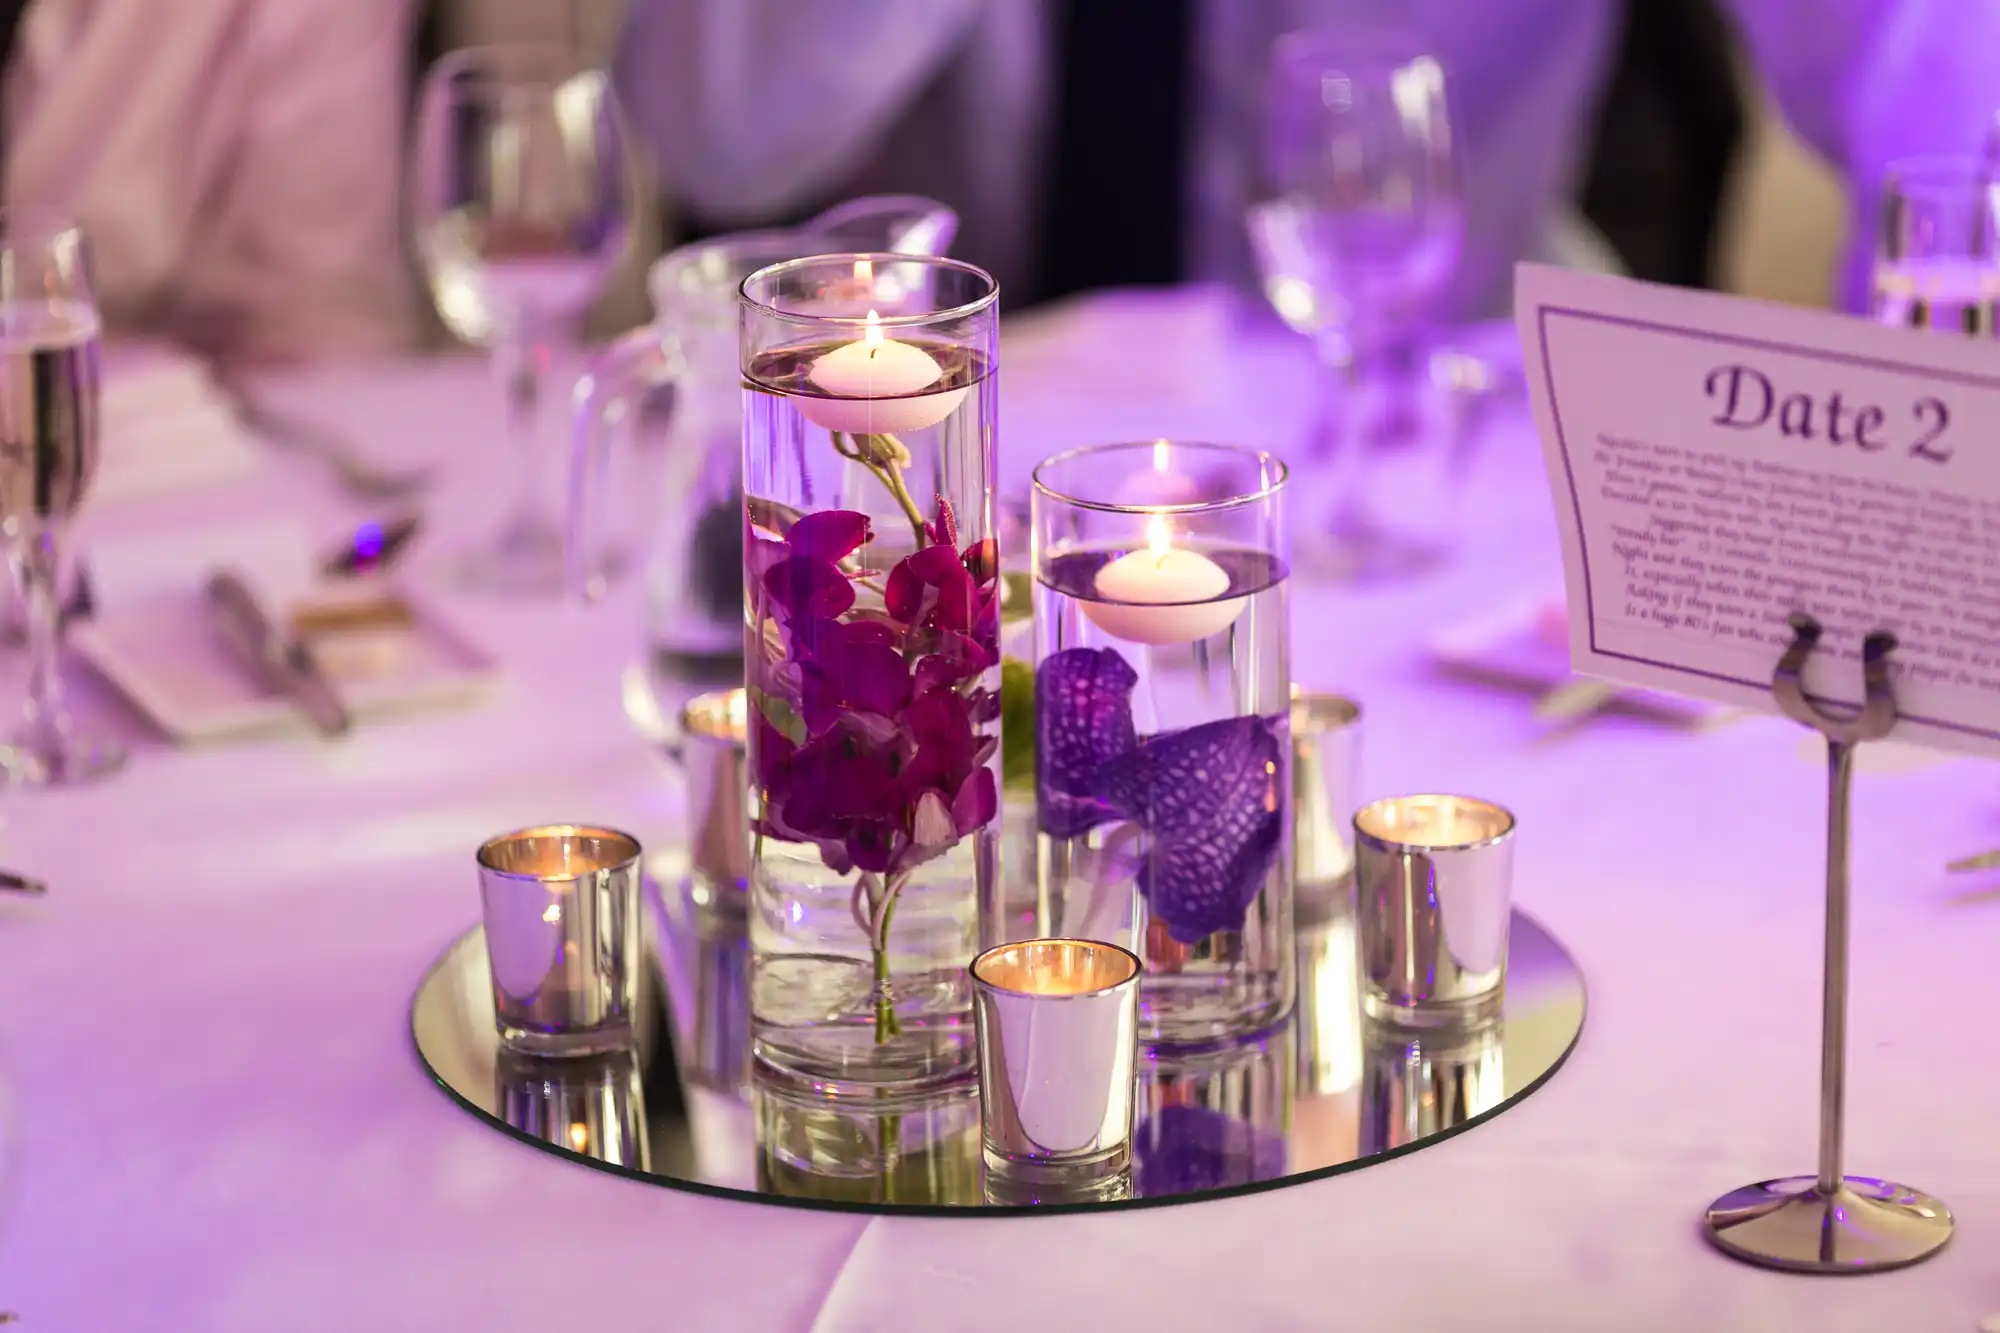 Elegant table centerpiece featuring floating candles in tall glasses, purple flowers submerged in water, and small votive candles, on a reflective mirror base at a formal event.